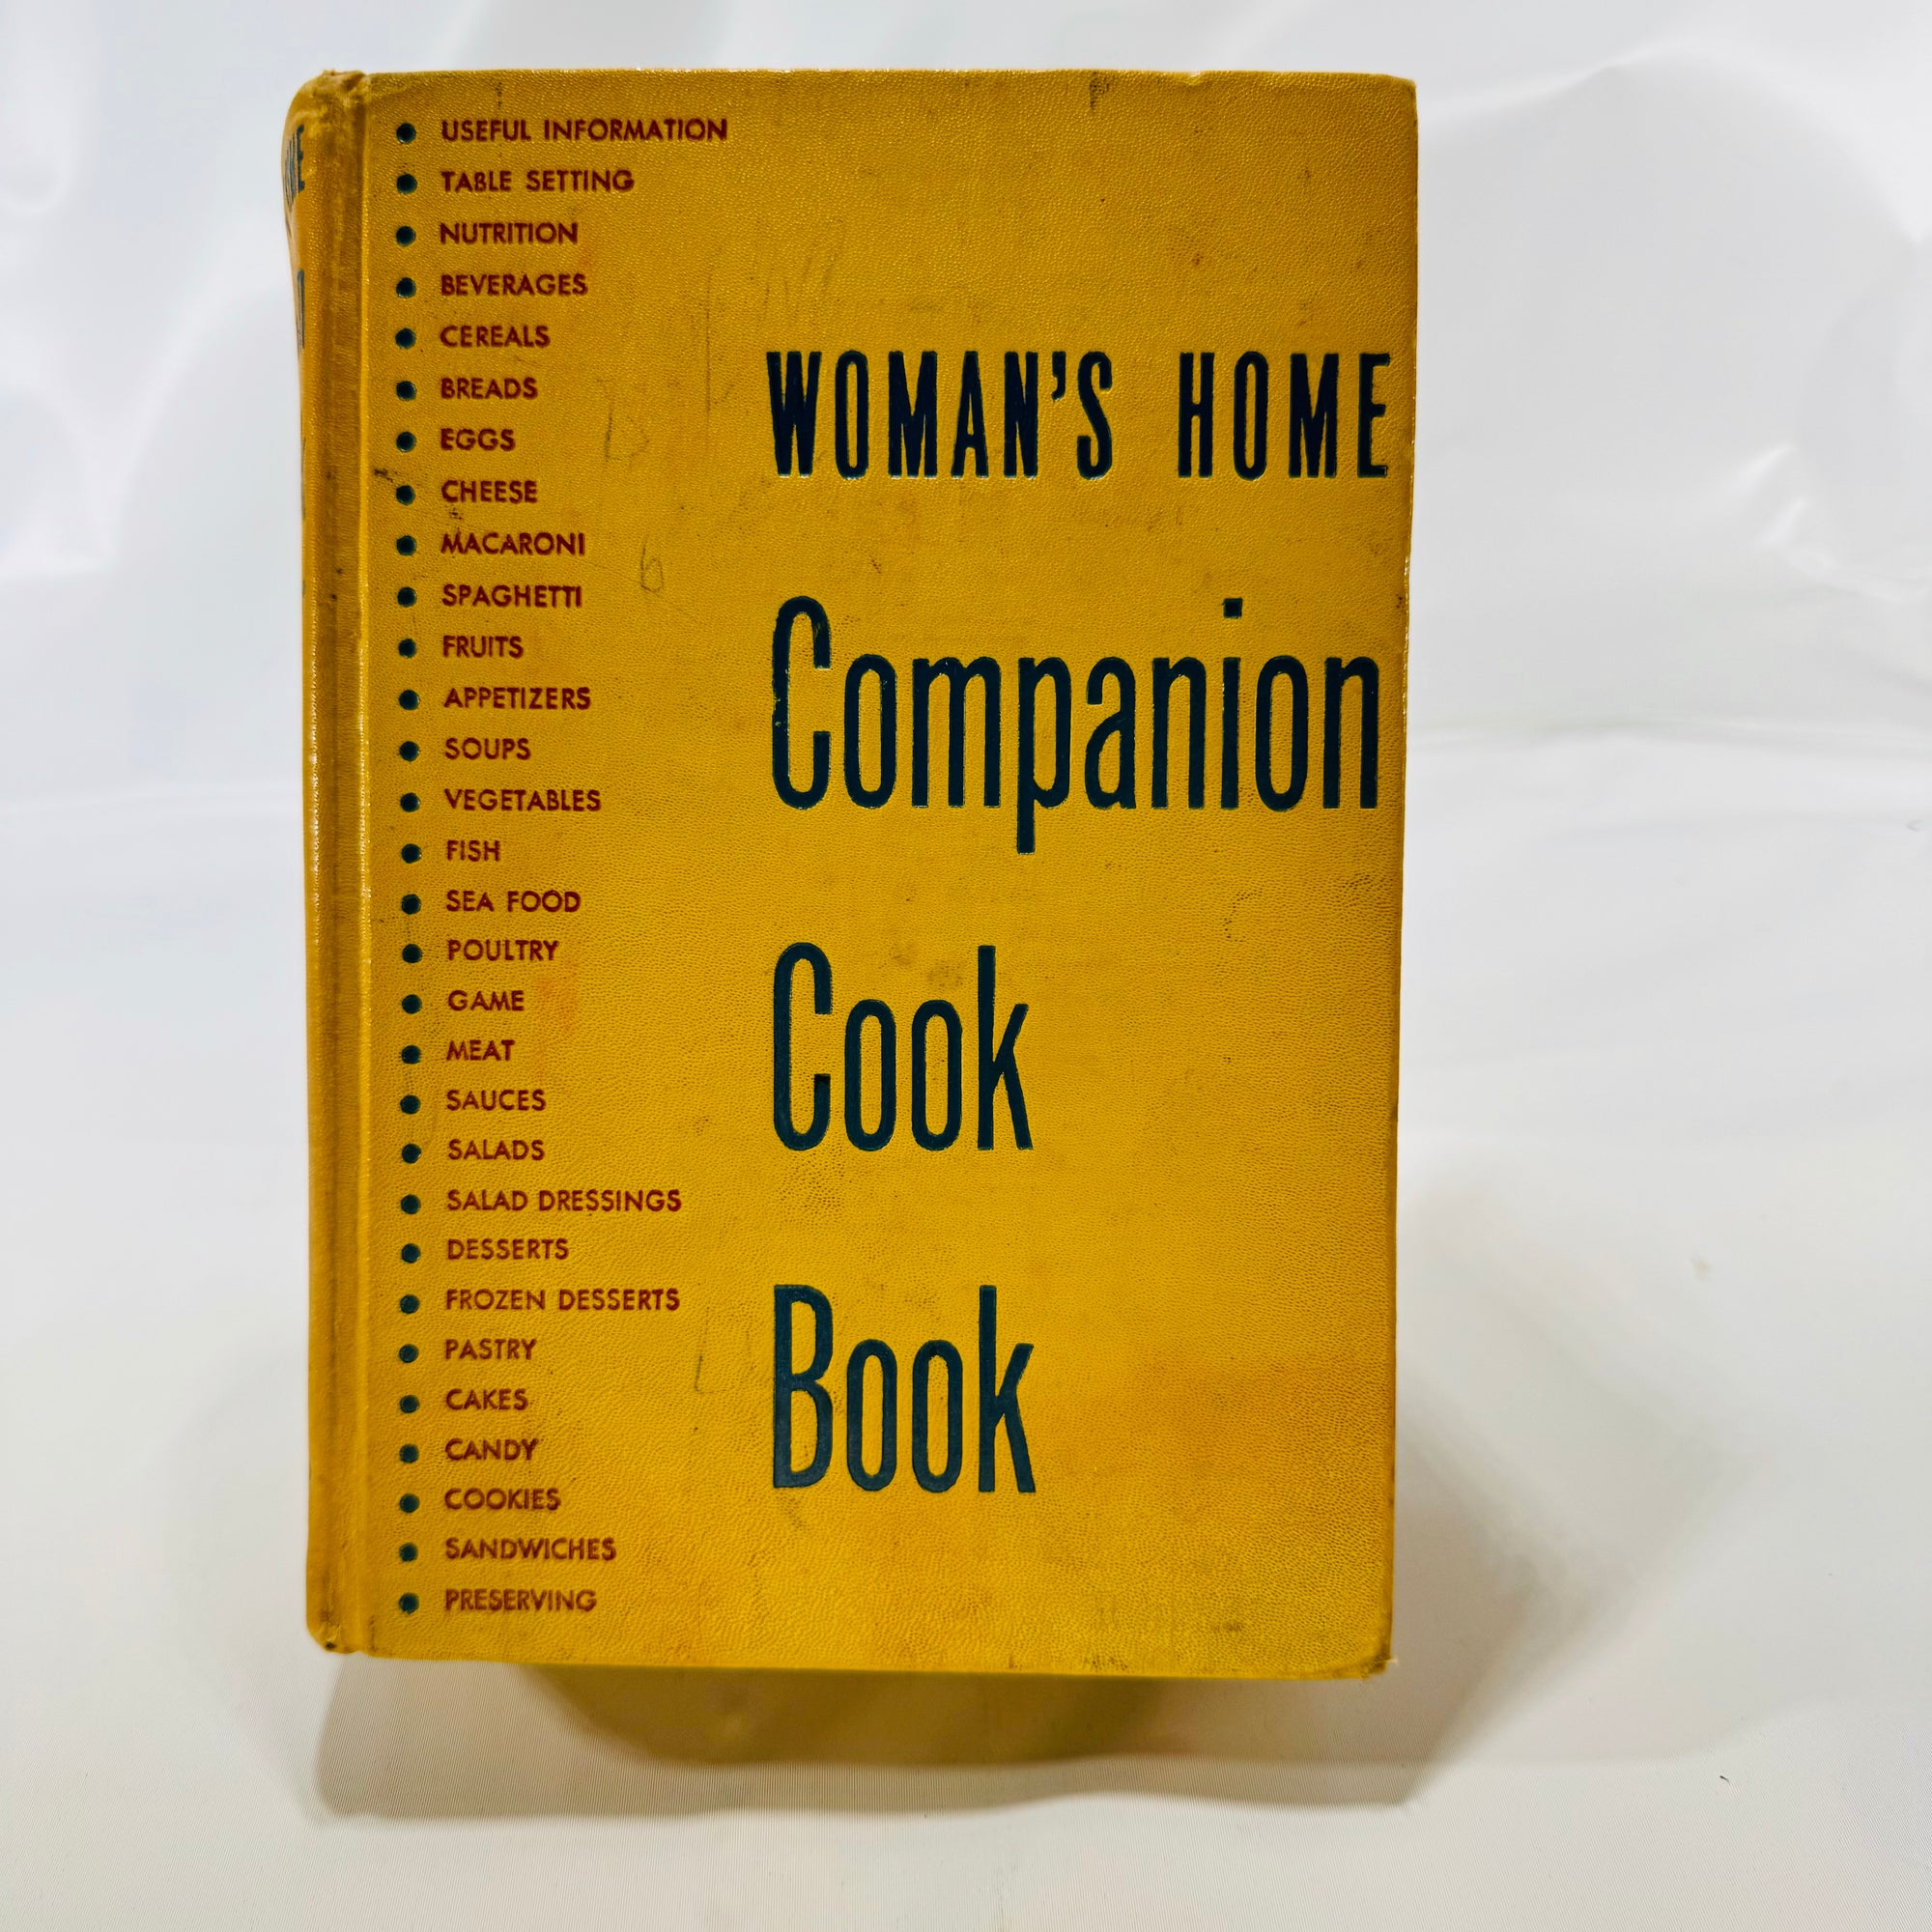 Women's Home Companion Cook Book edited by Dorthy Kirk 1946 P.F. Collier & Son